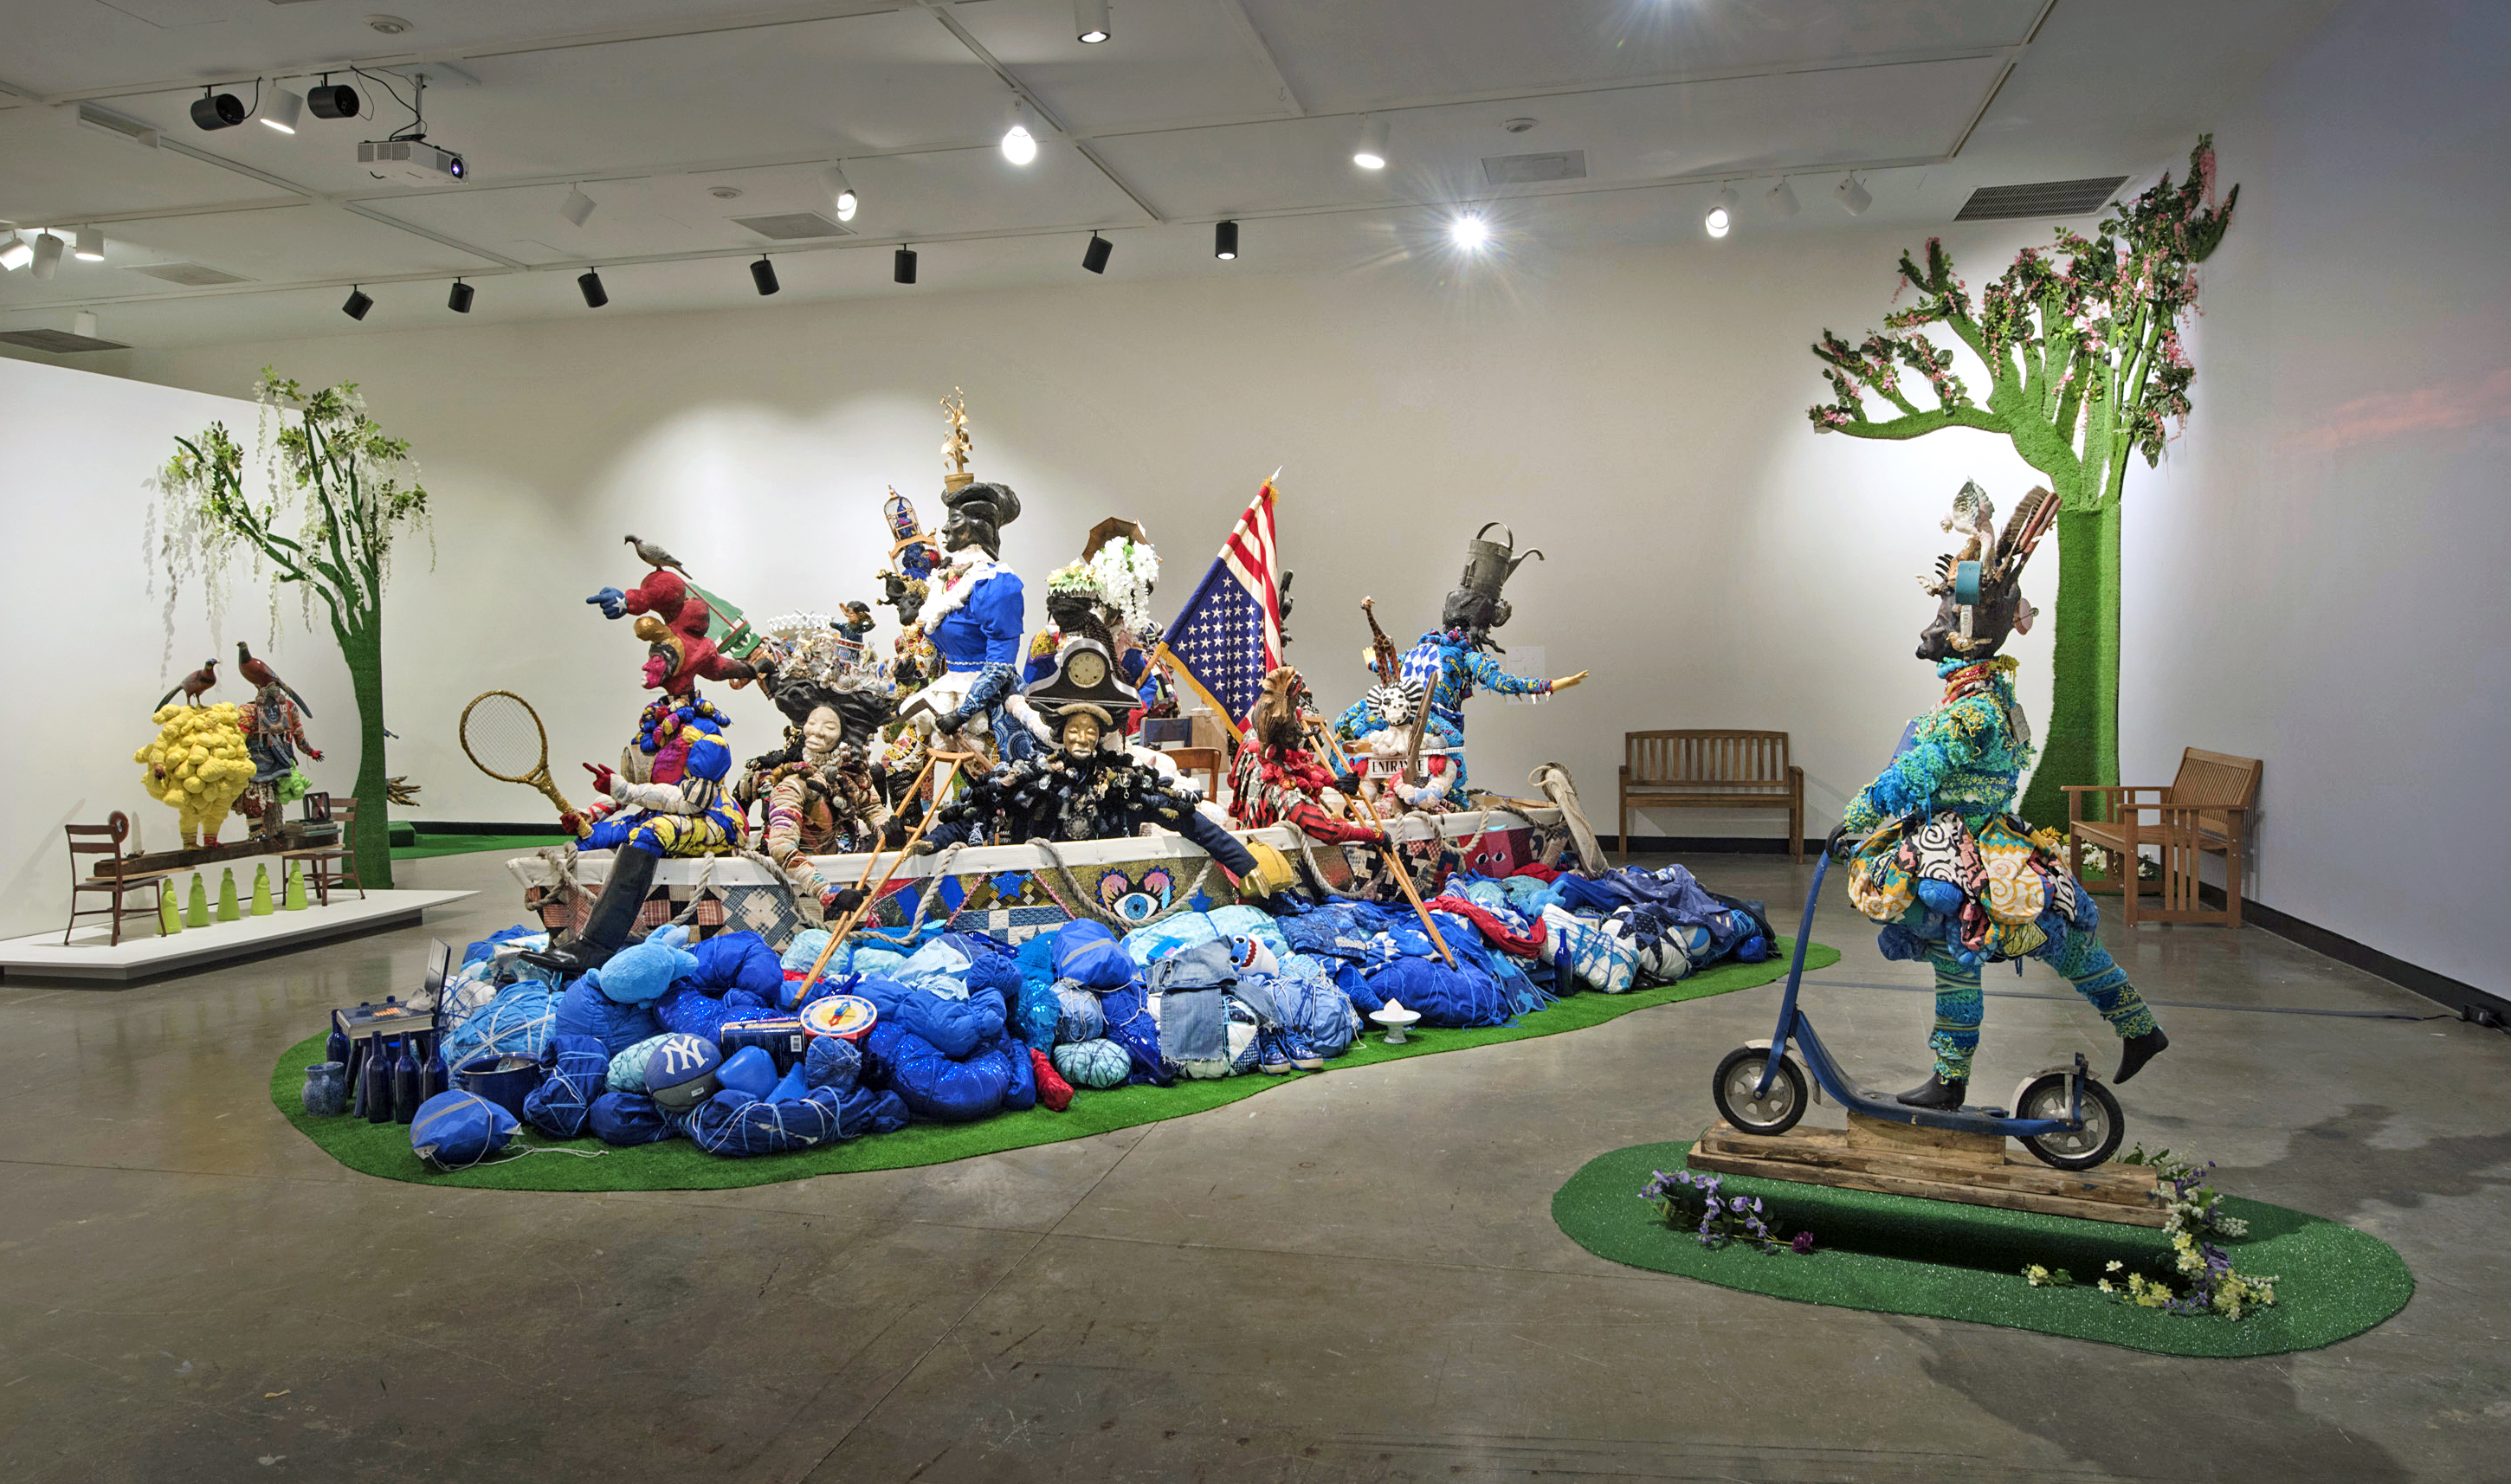 vanessa german, Installation view including "Miracles and Glory Abound" (2018) and "oh for the healing of the blues" (2016), 2023. Mixed-media assemblages. Dimensions variable. Montclair Art Museum. Photo by Peter Jacobs. 